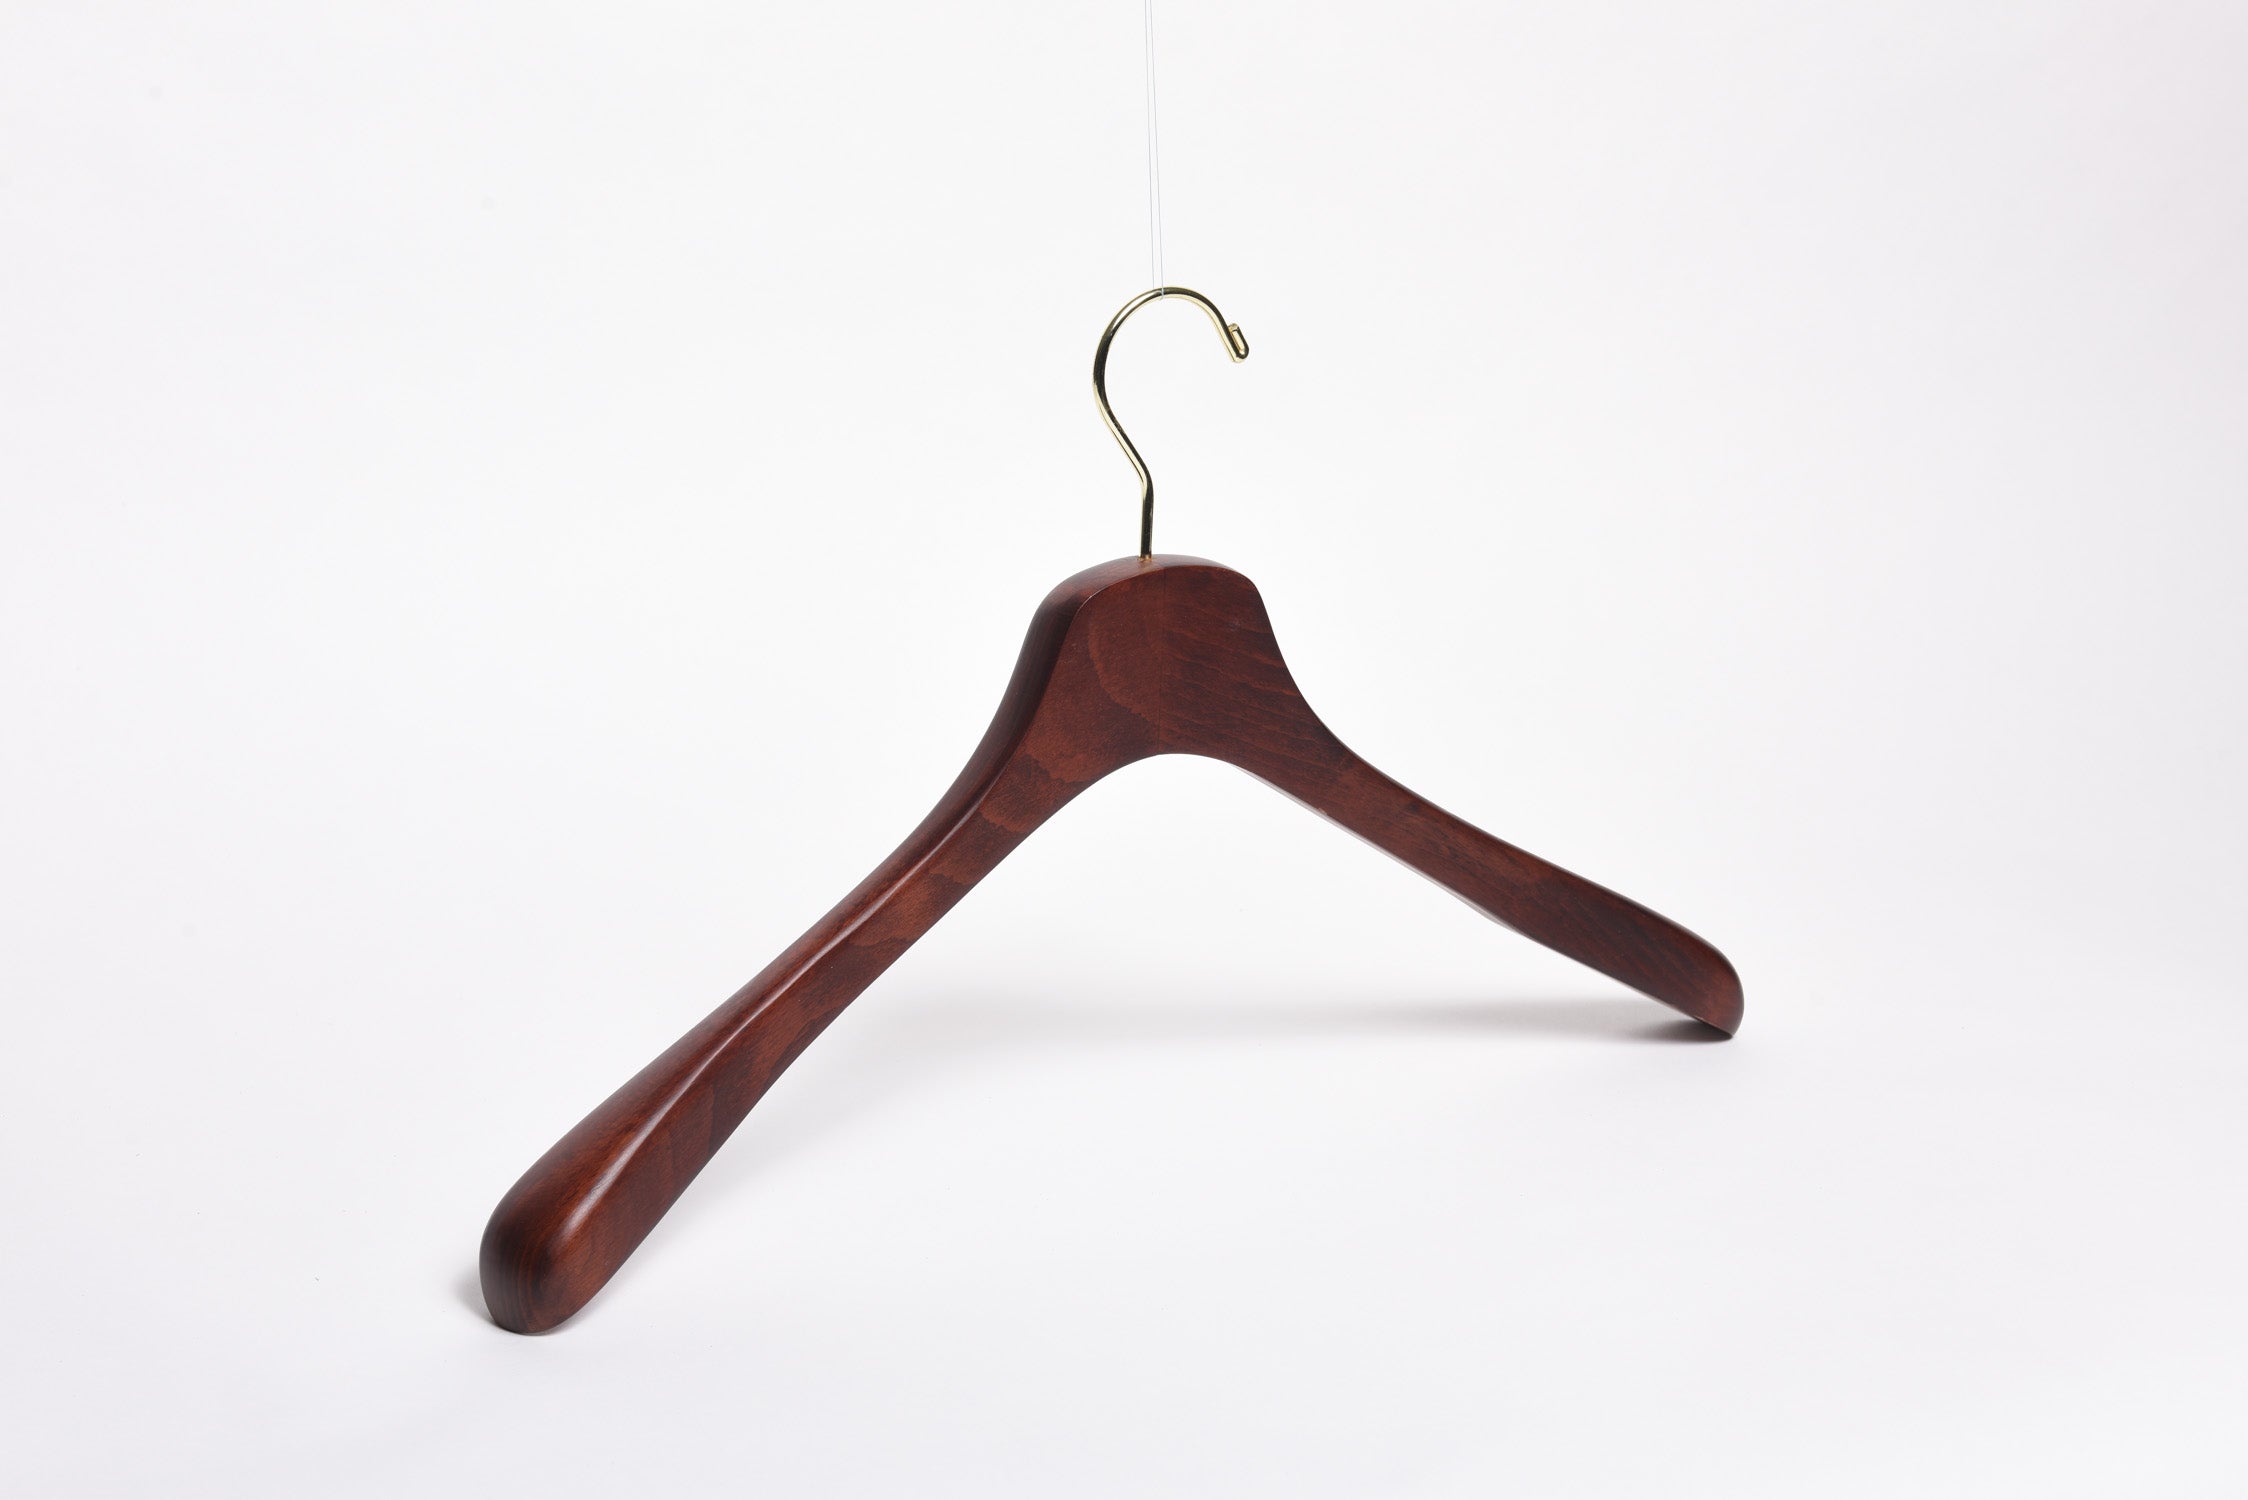 W050-30 - Quality Wooden Hangers - Slightly Curved Hanger So